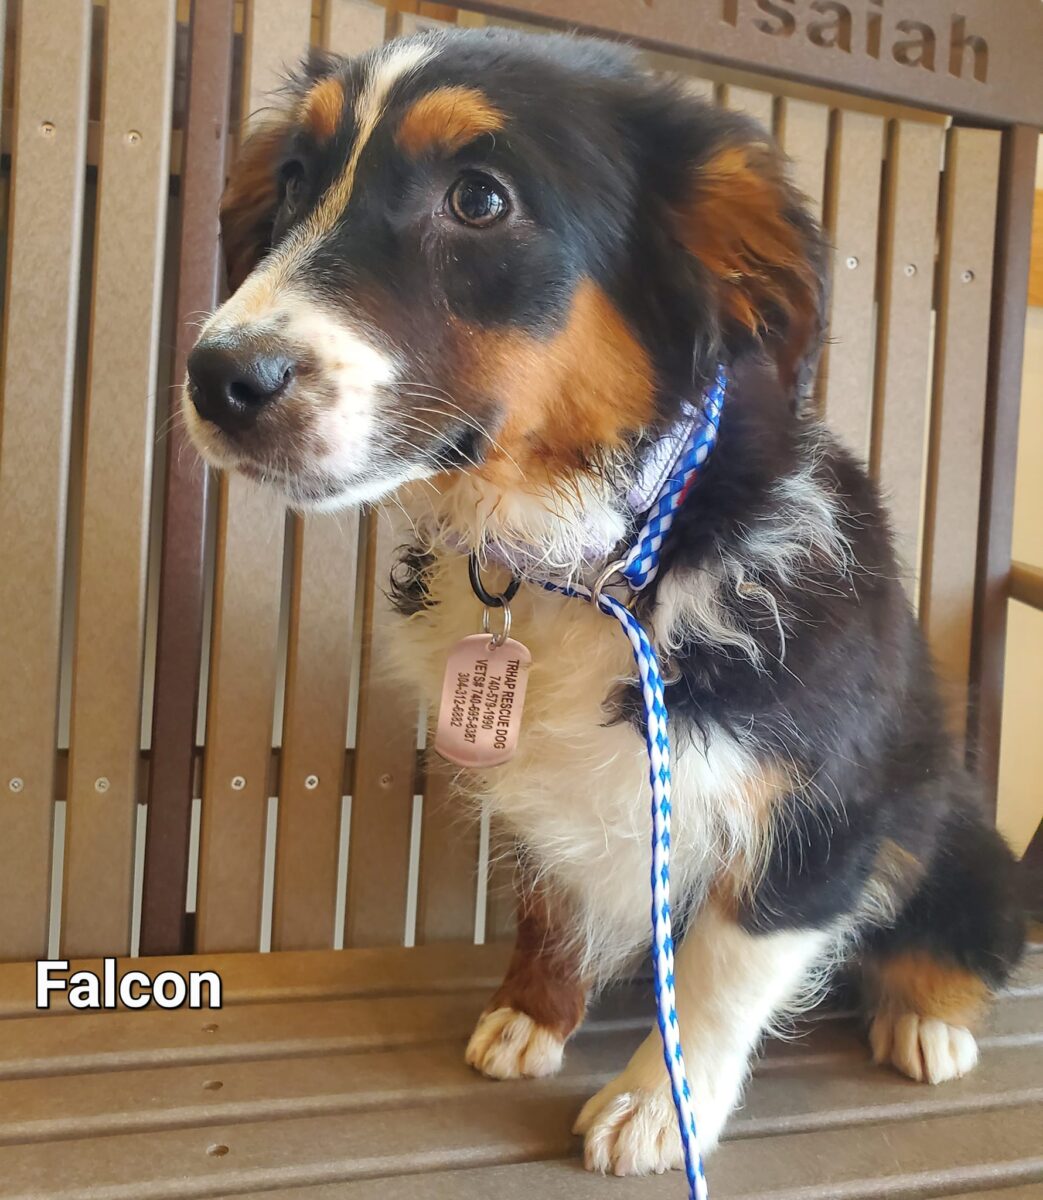 Falcon - The Road Home Animal Project